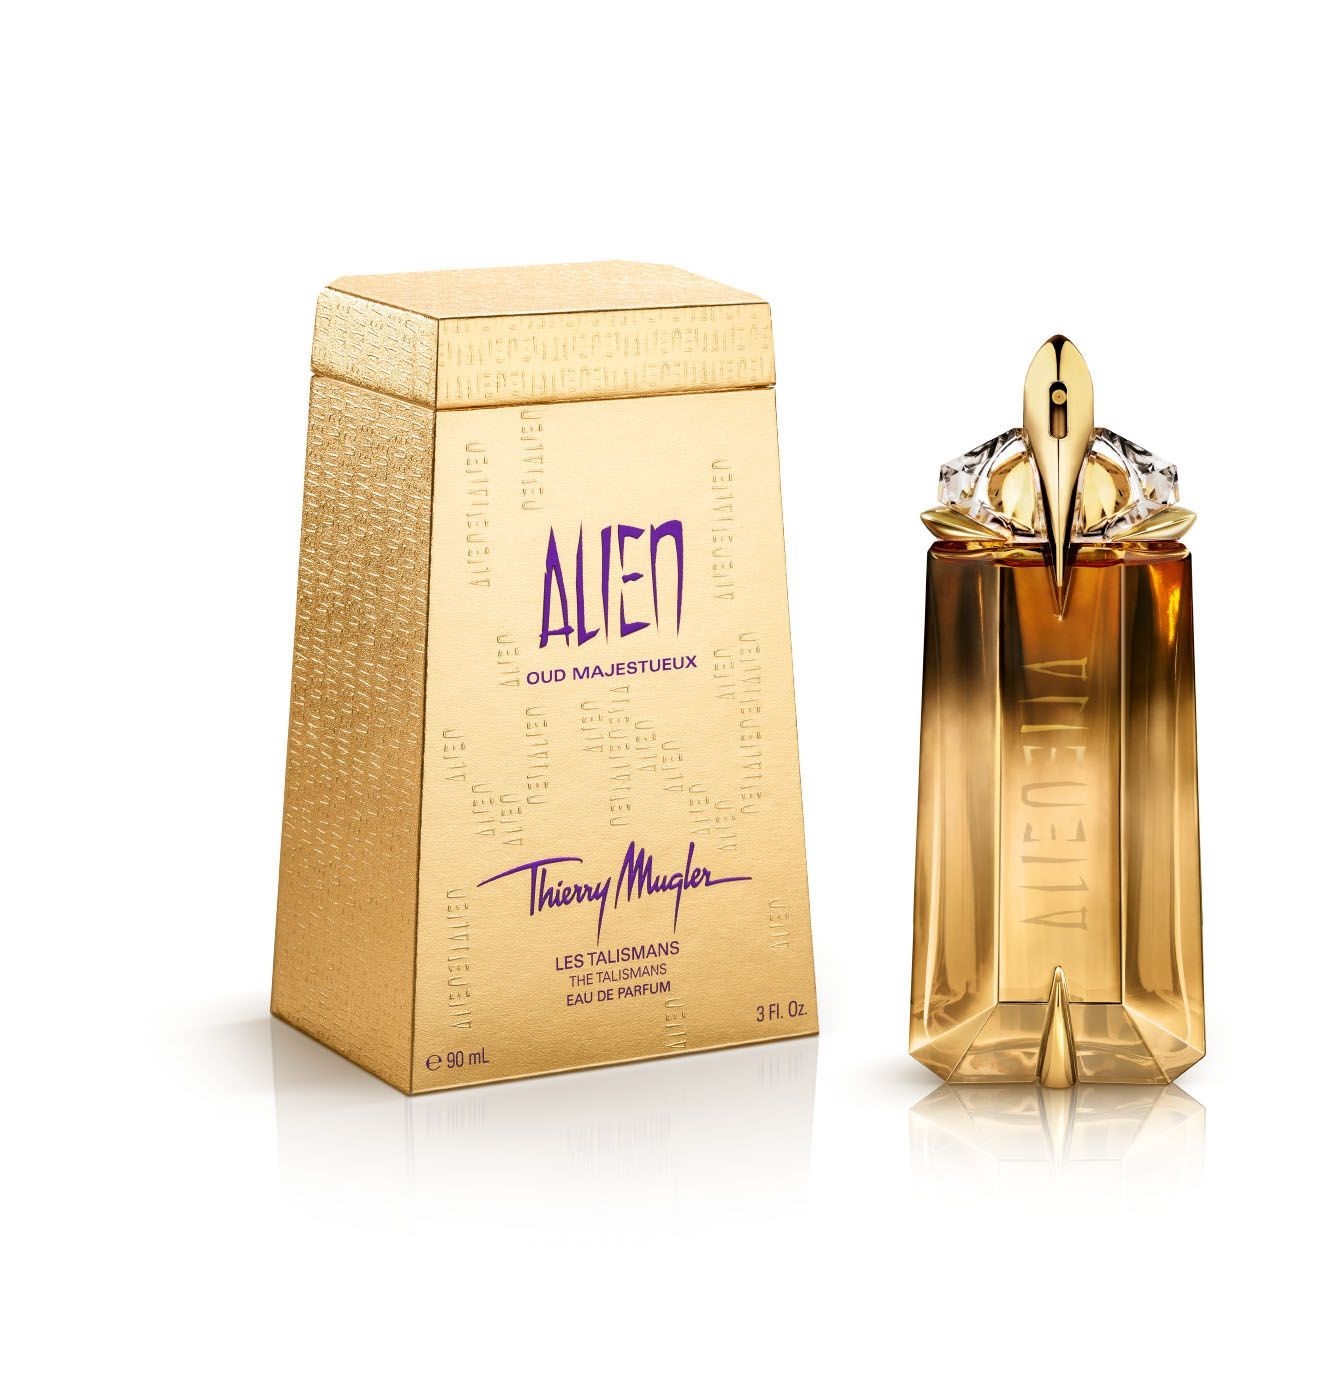 THIERRY MUGLER ALIEN OUD MAJESTUEUX